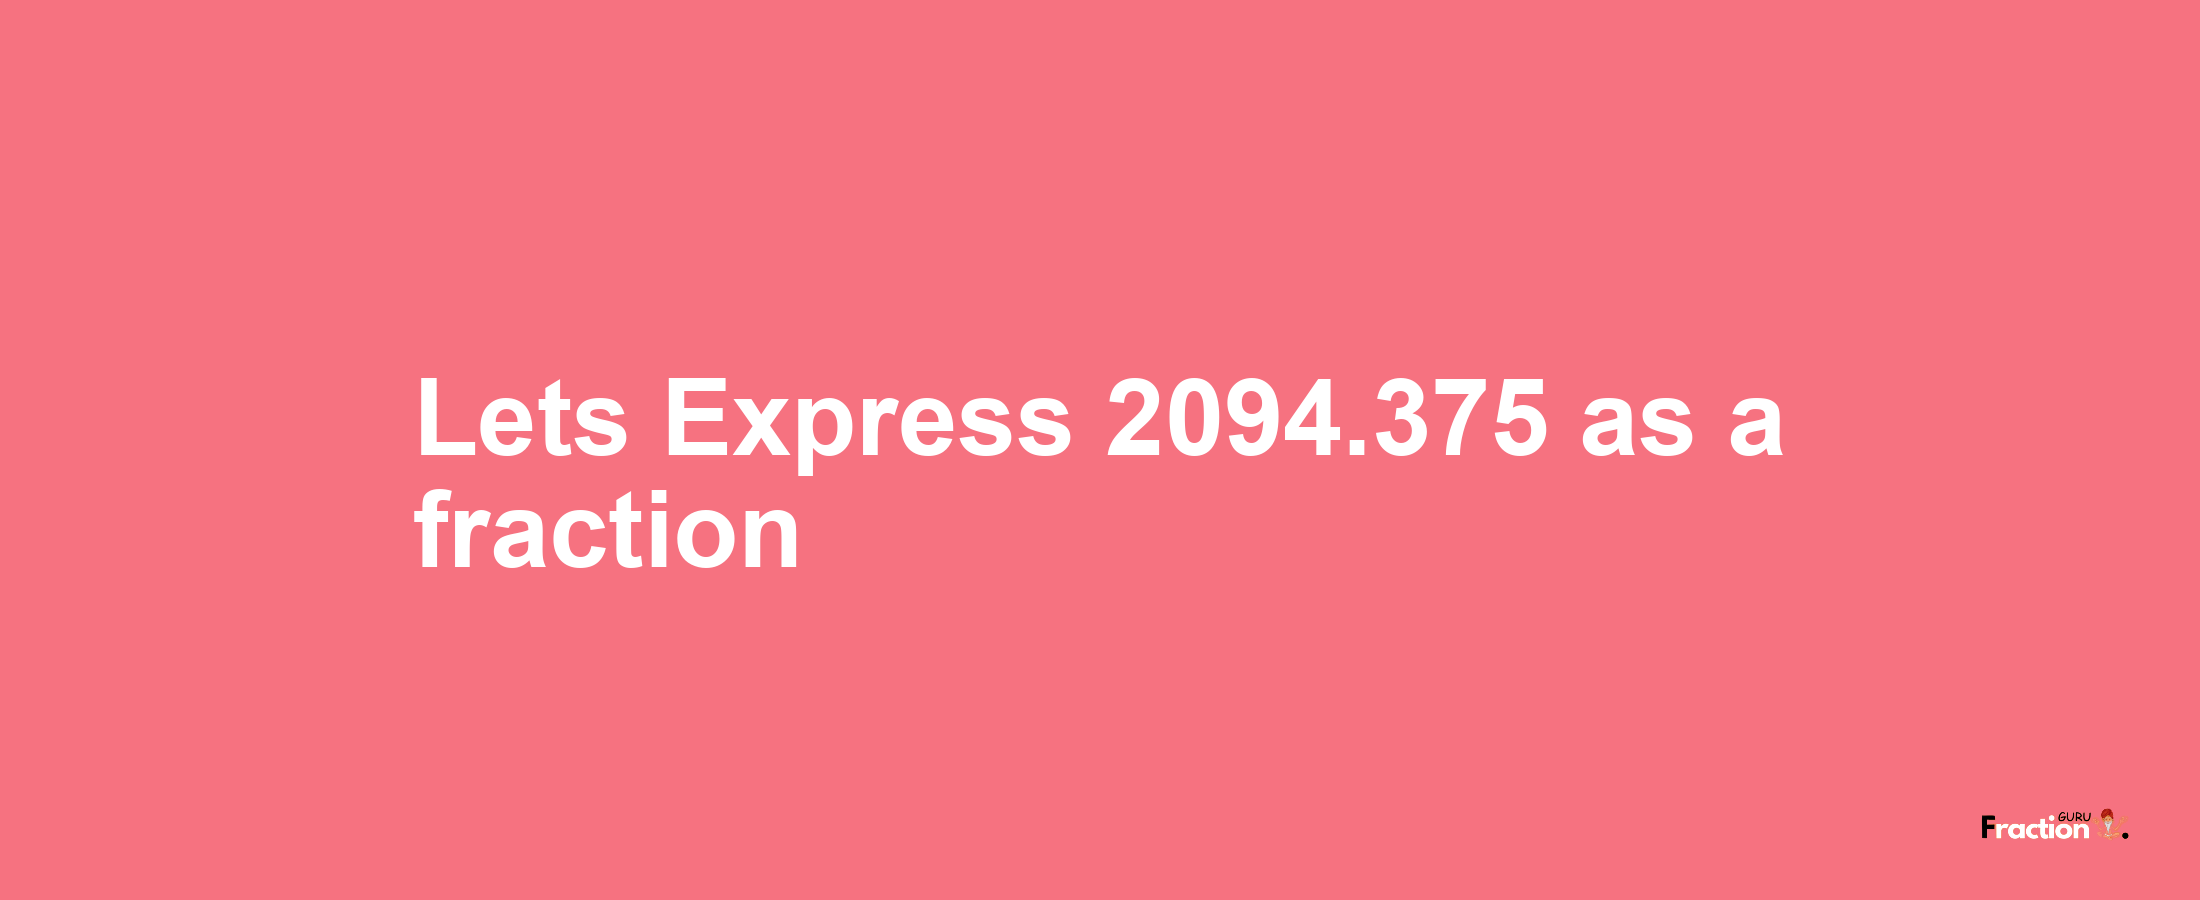 Lets Express 2094.375 as afraction